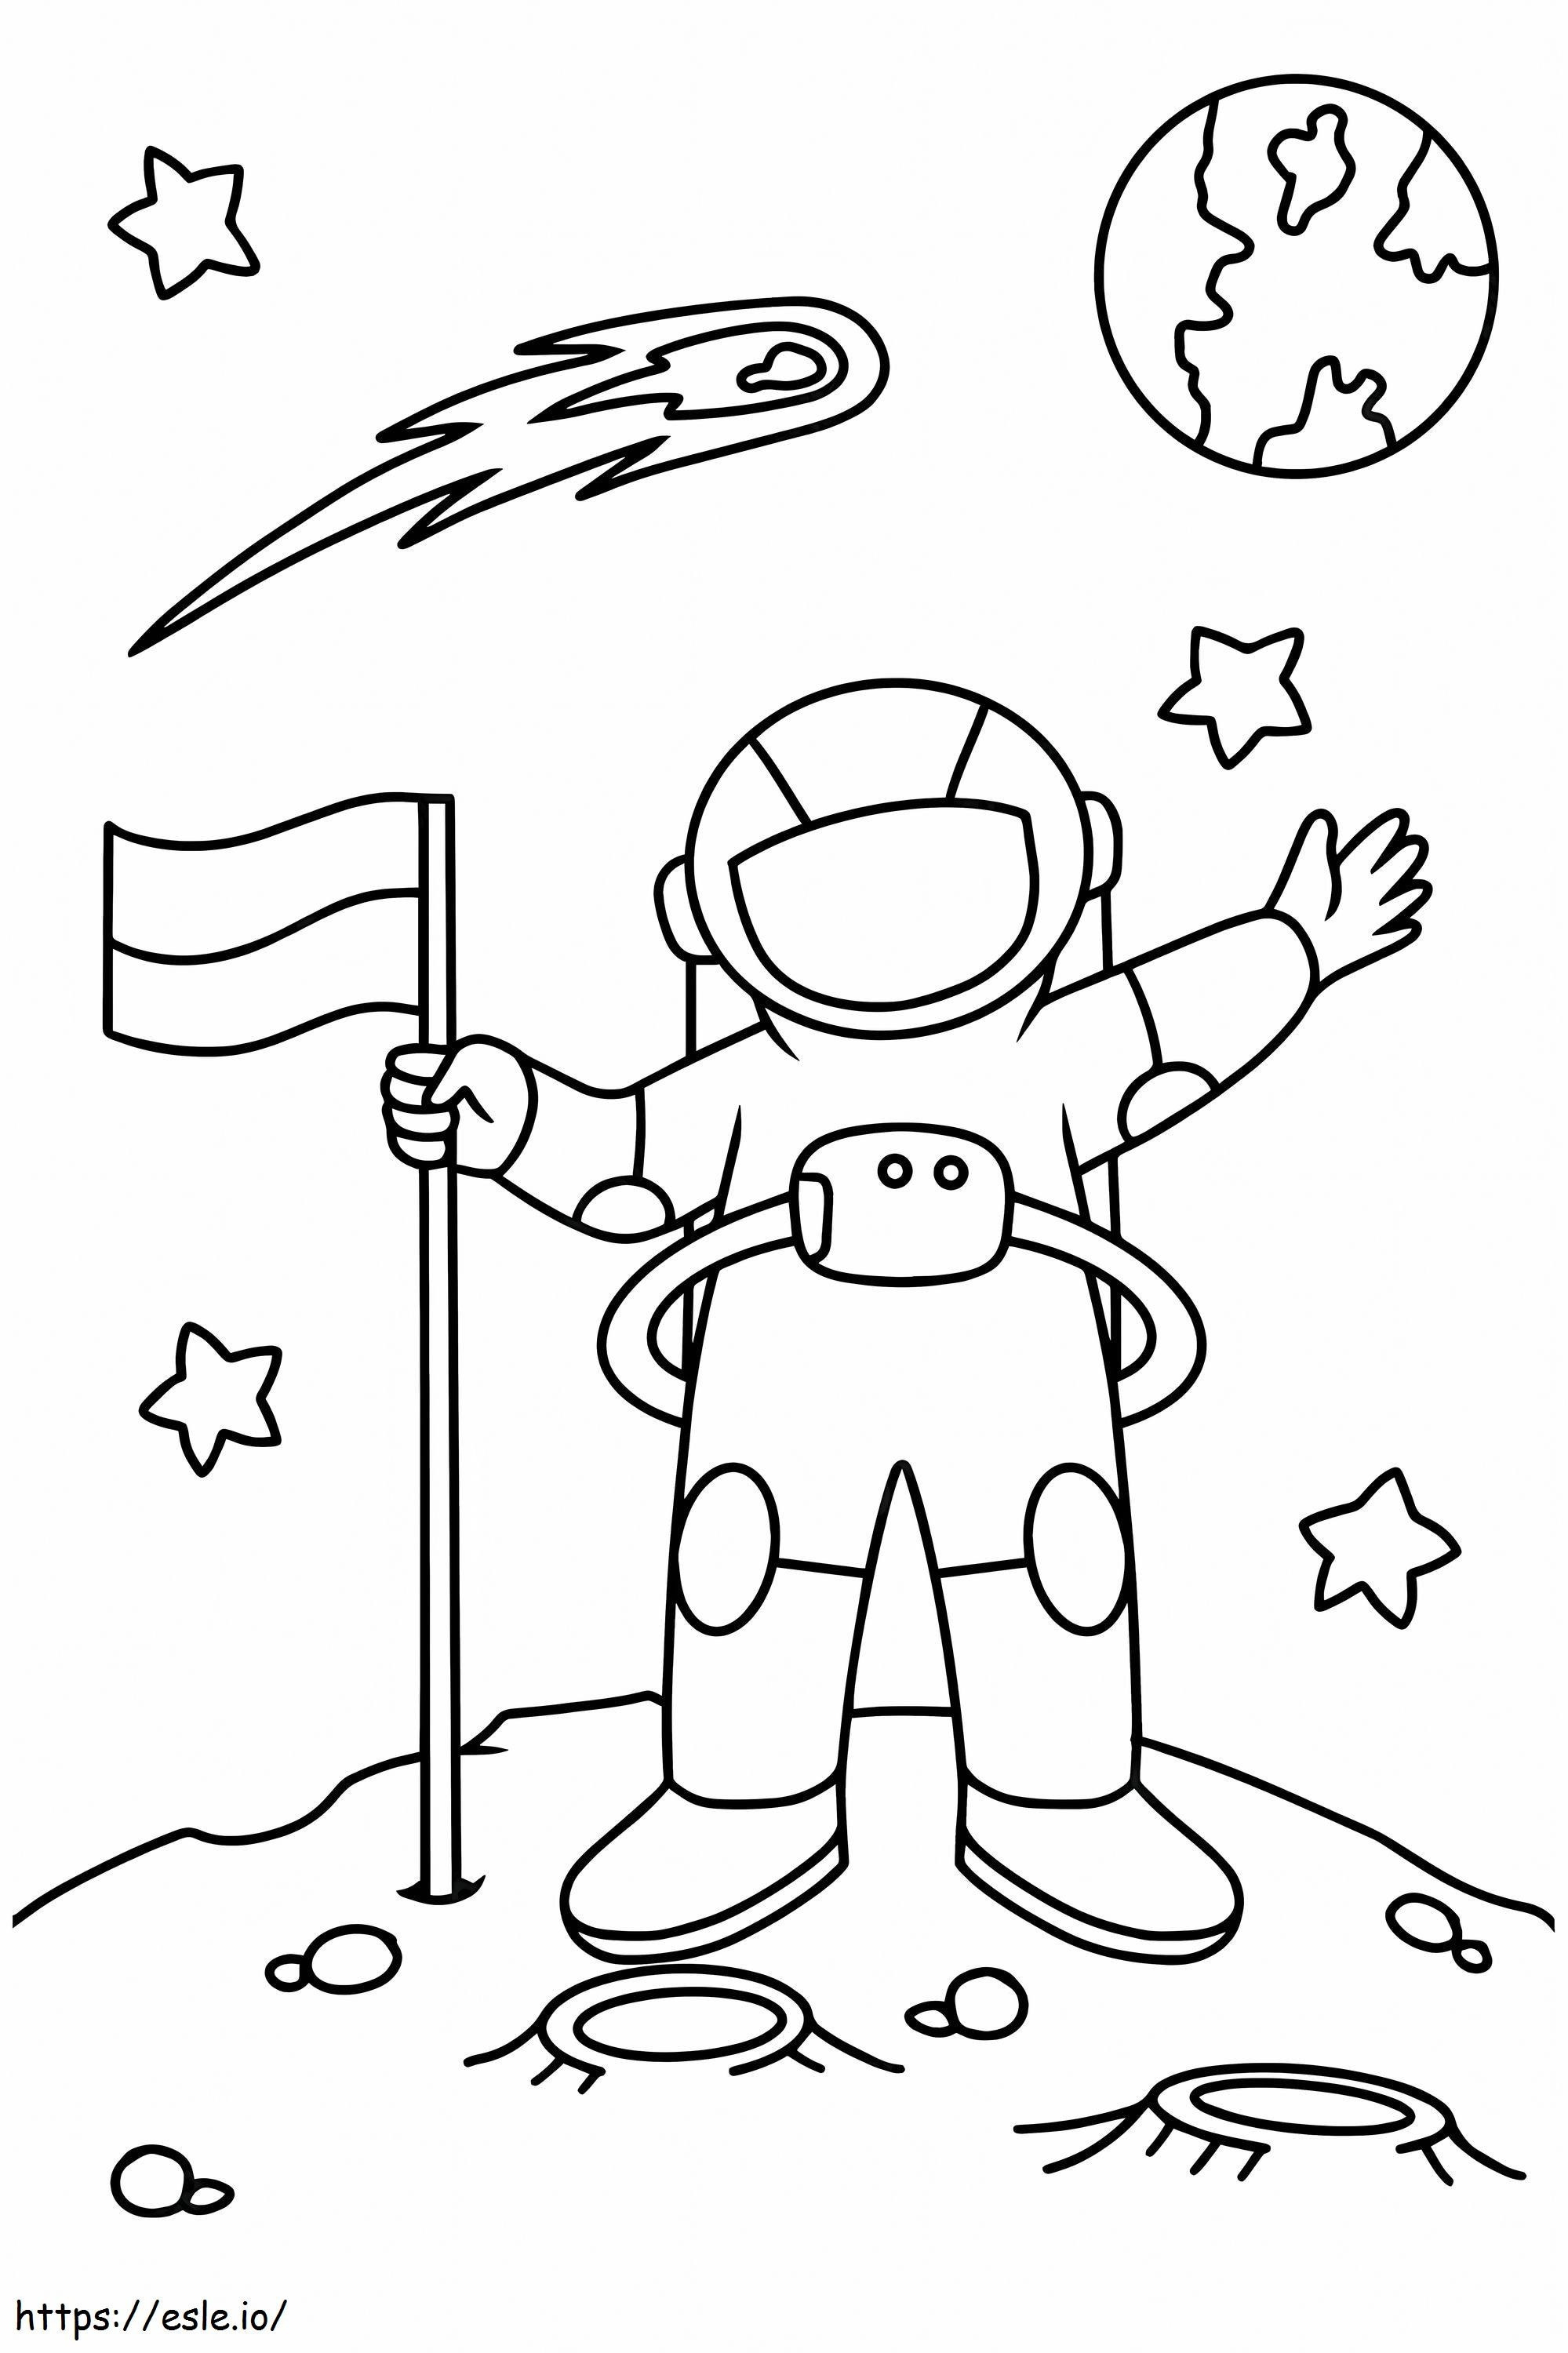 Astronaut With Flag On The Planet coloring page